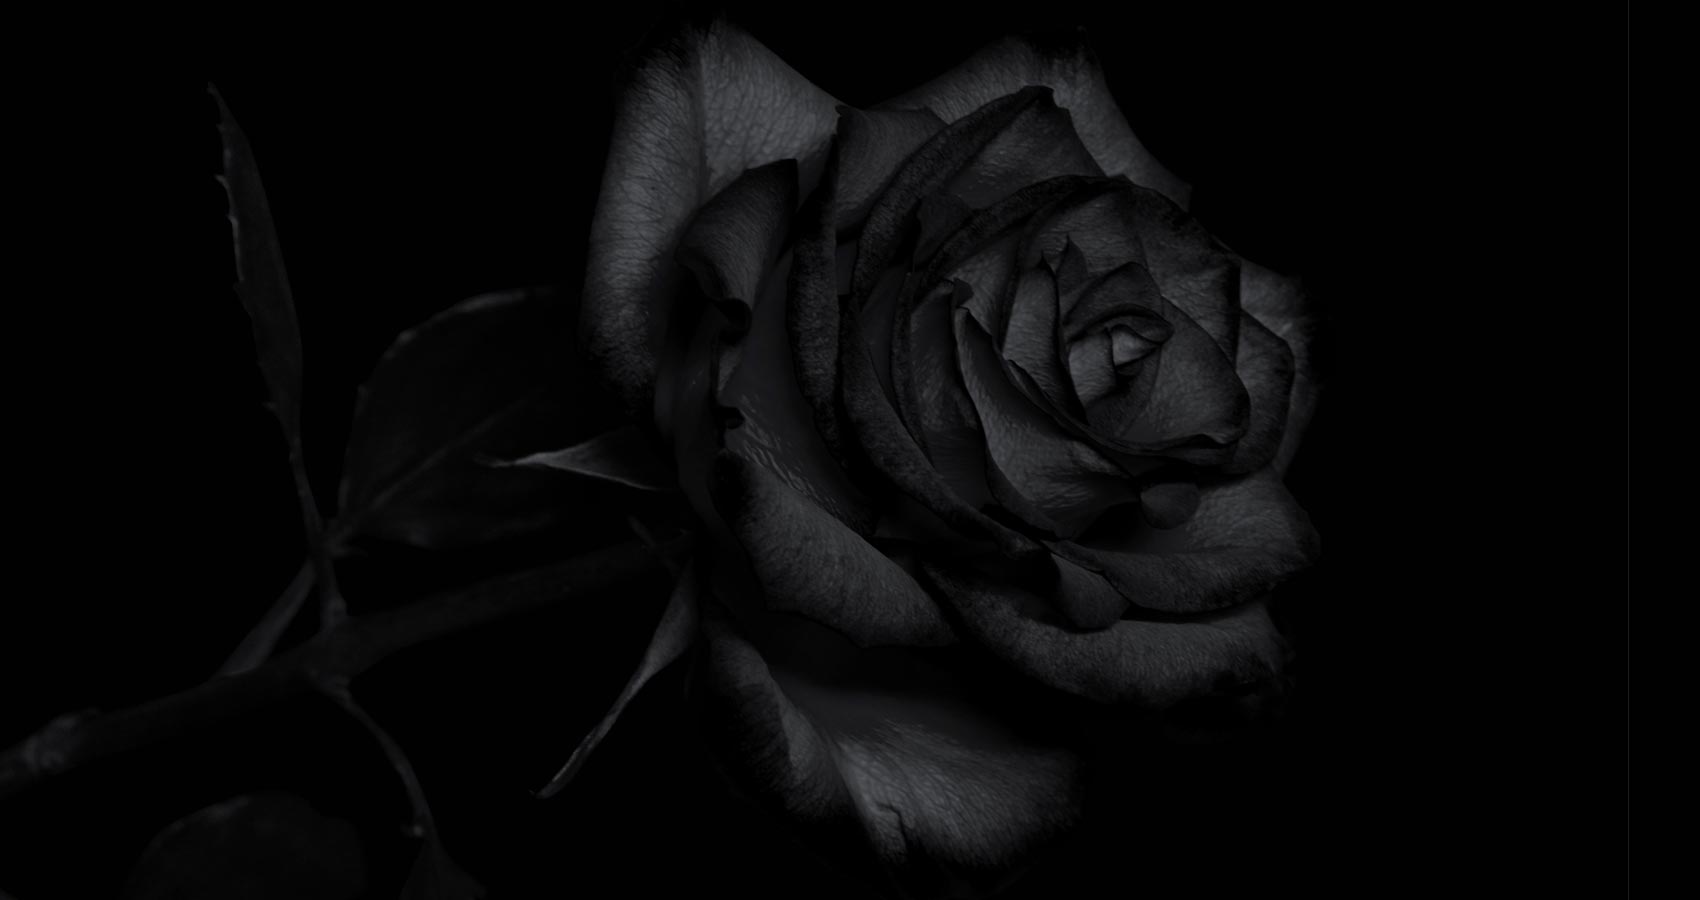 Black Rose, poetry by Annie Varghese at Spillwords.com